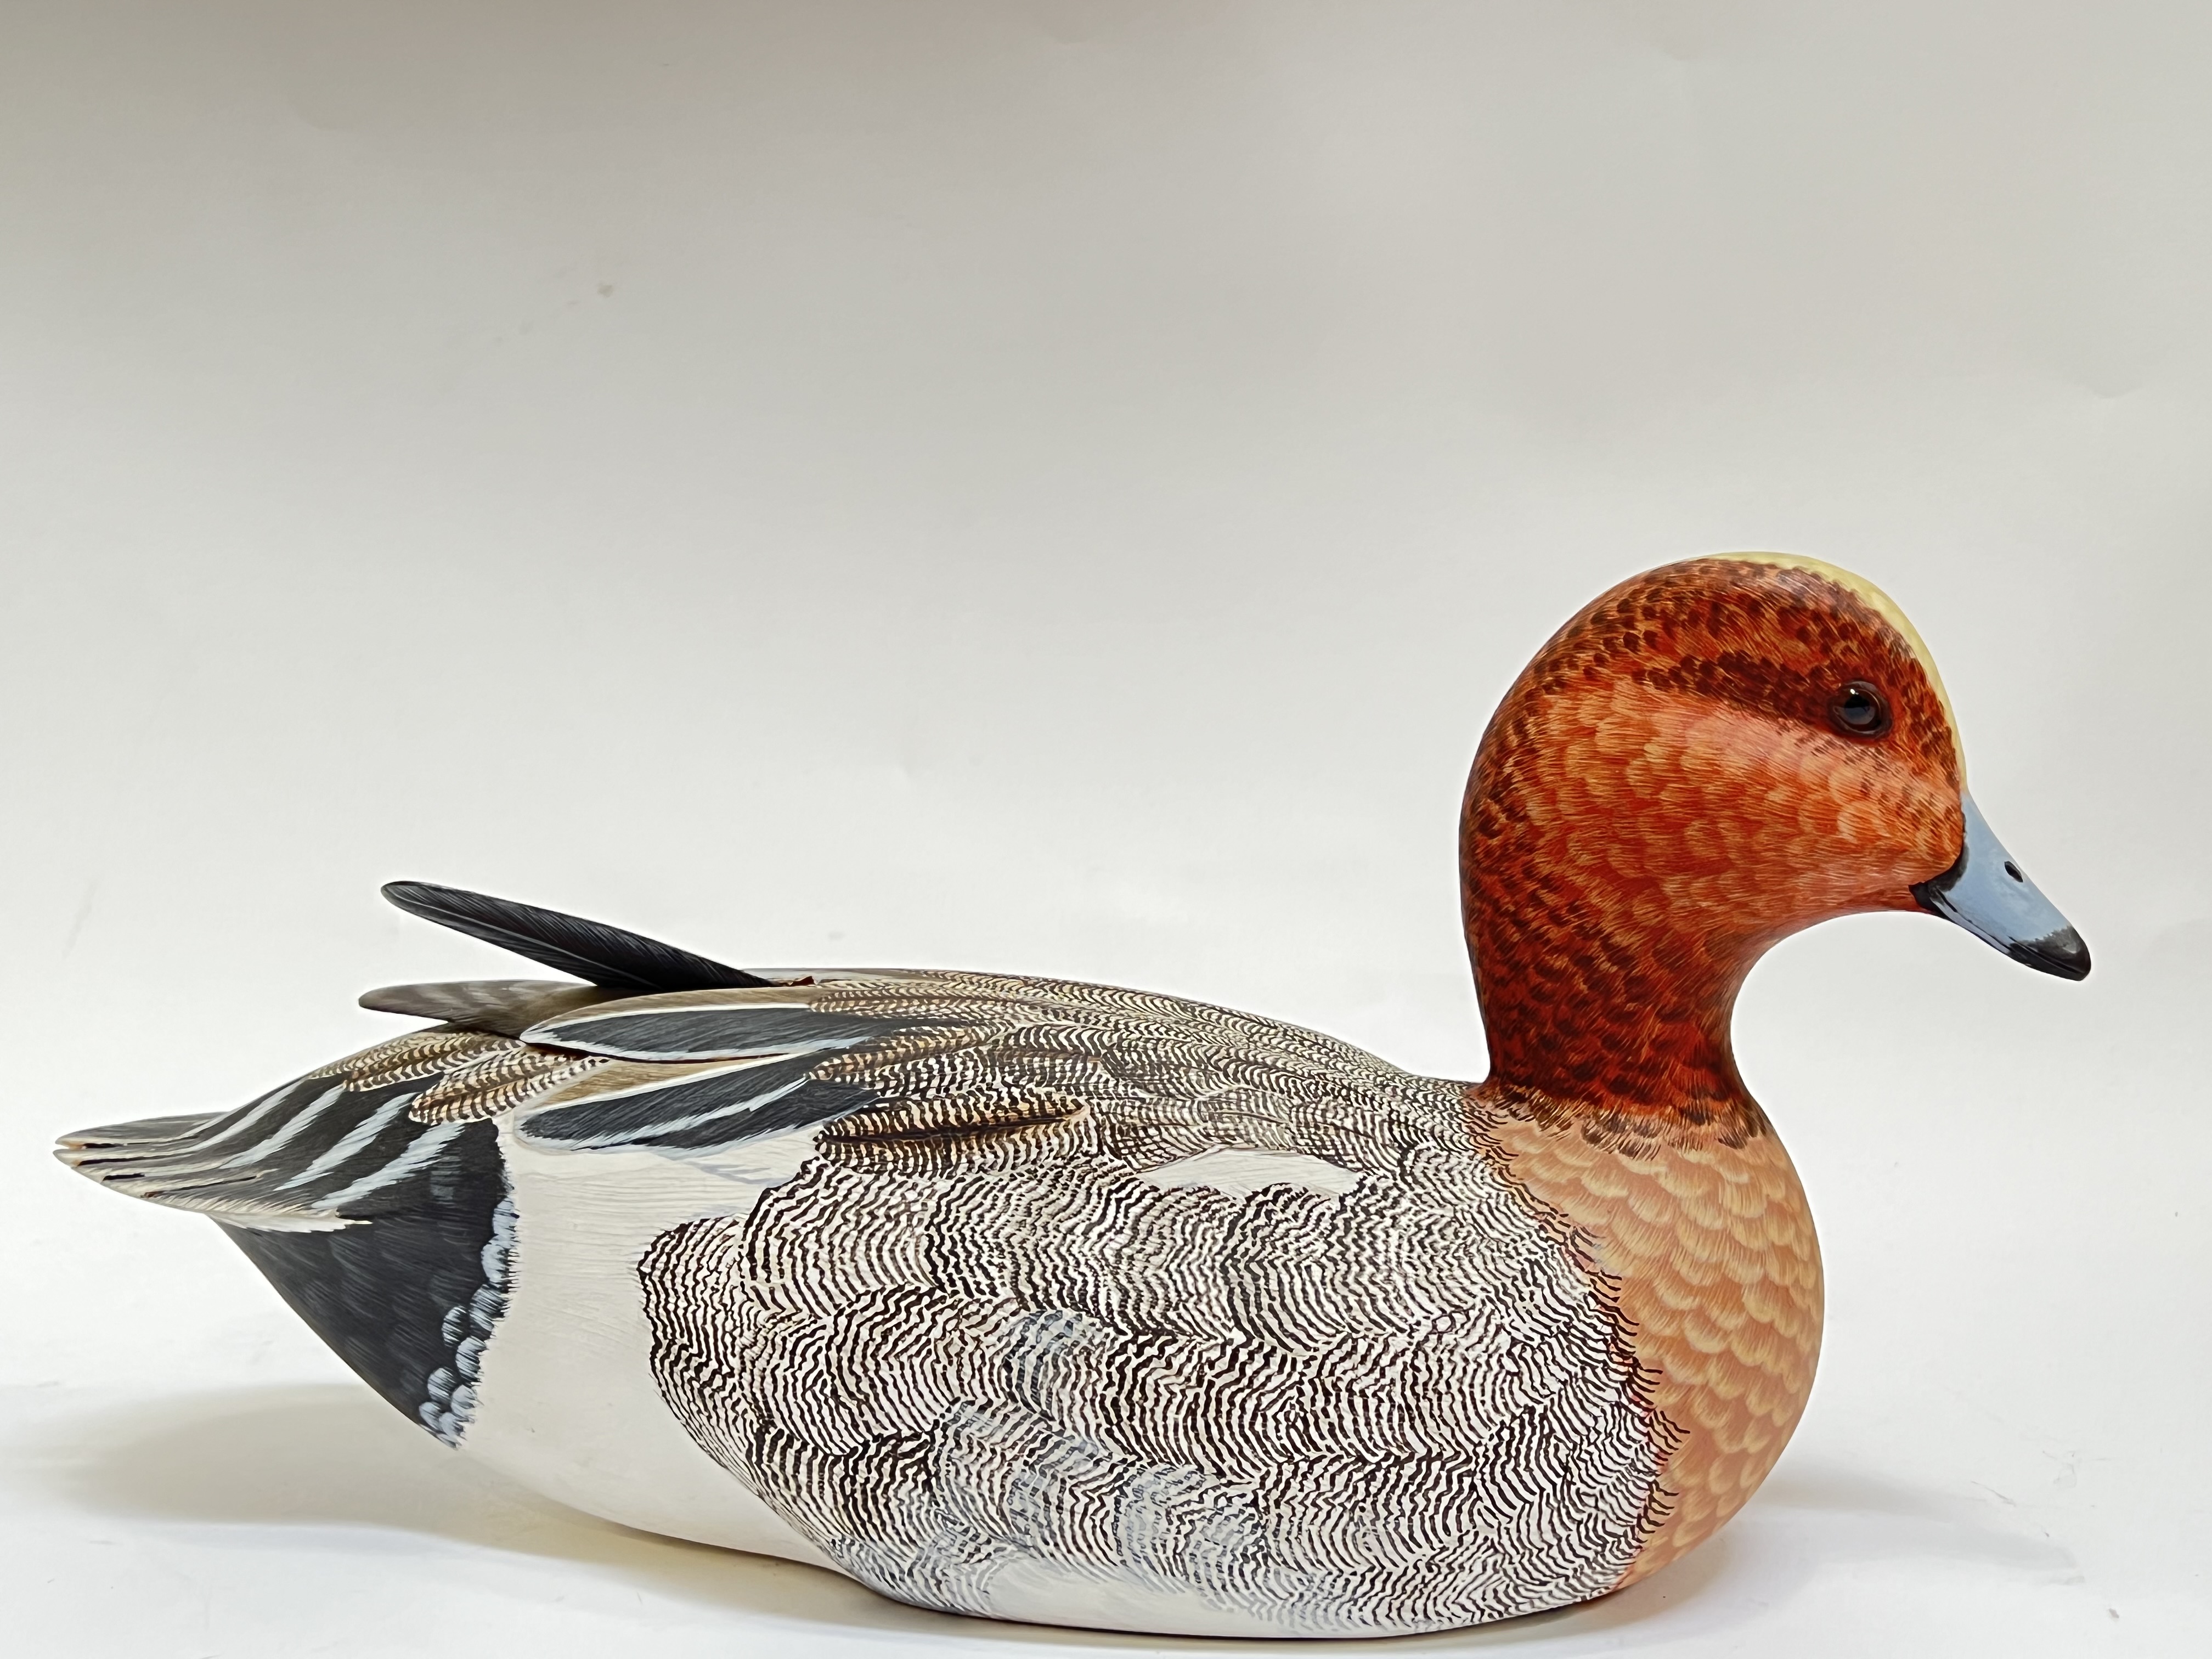 A fine quality hand-painted wooden duck decoy with glass eyes by Mike Wood (h- 18cm, w- 36cm) - Image 3 of 4